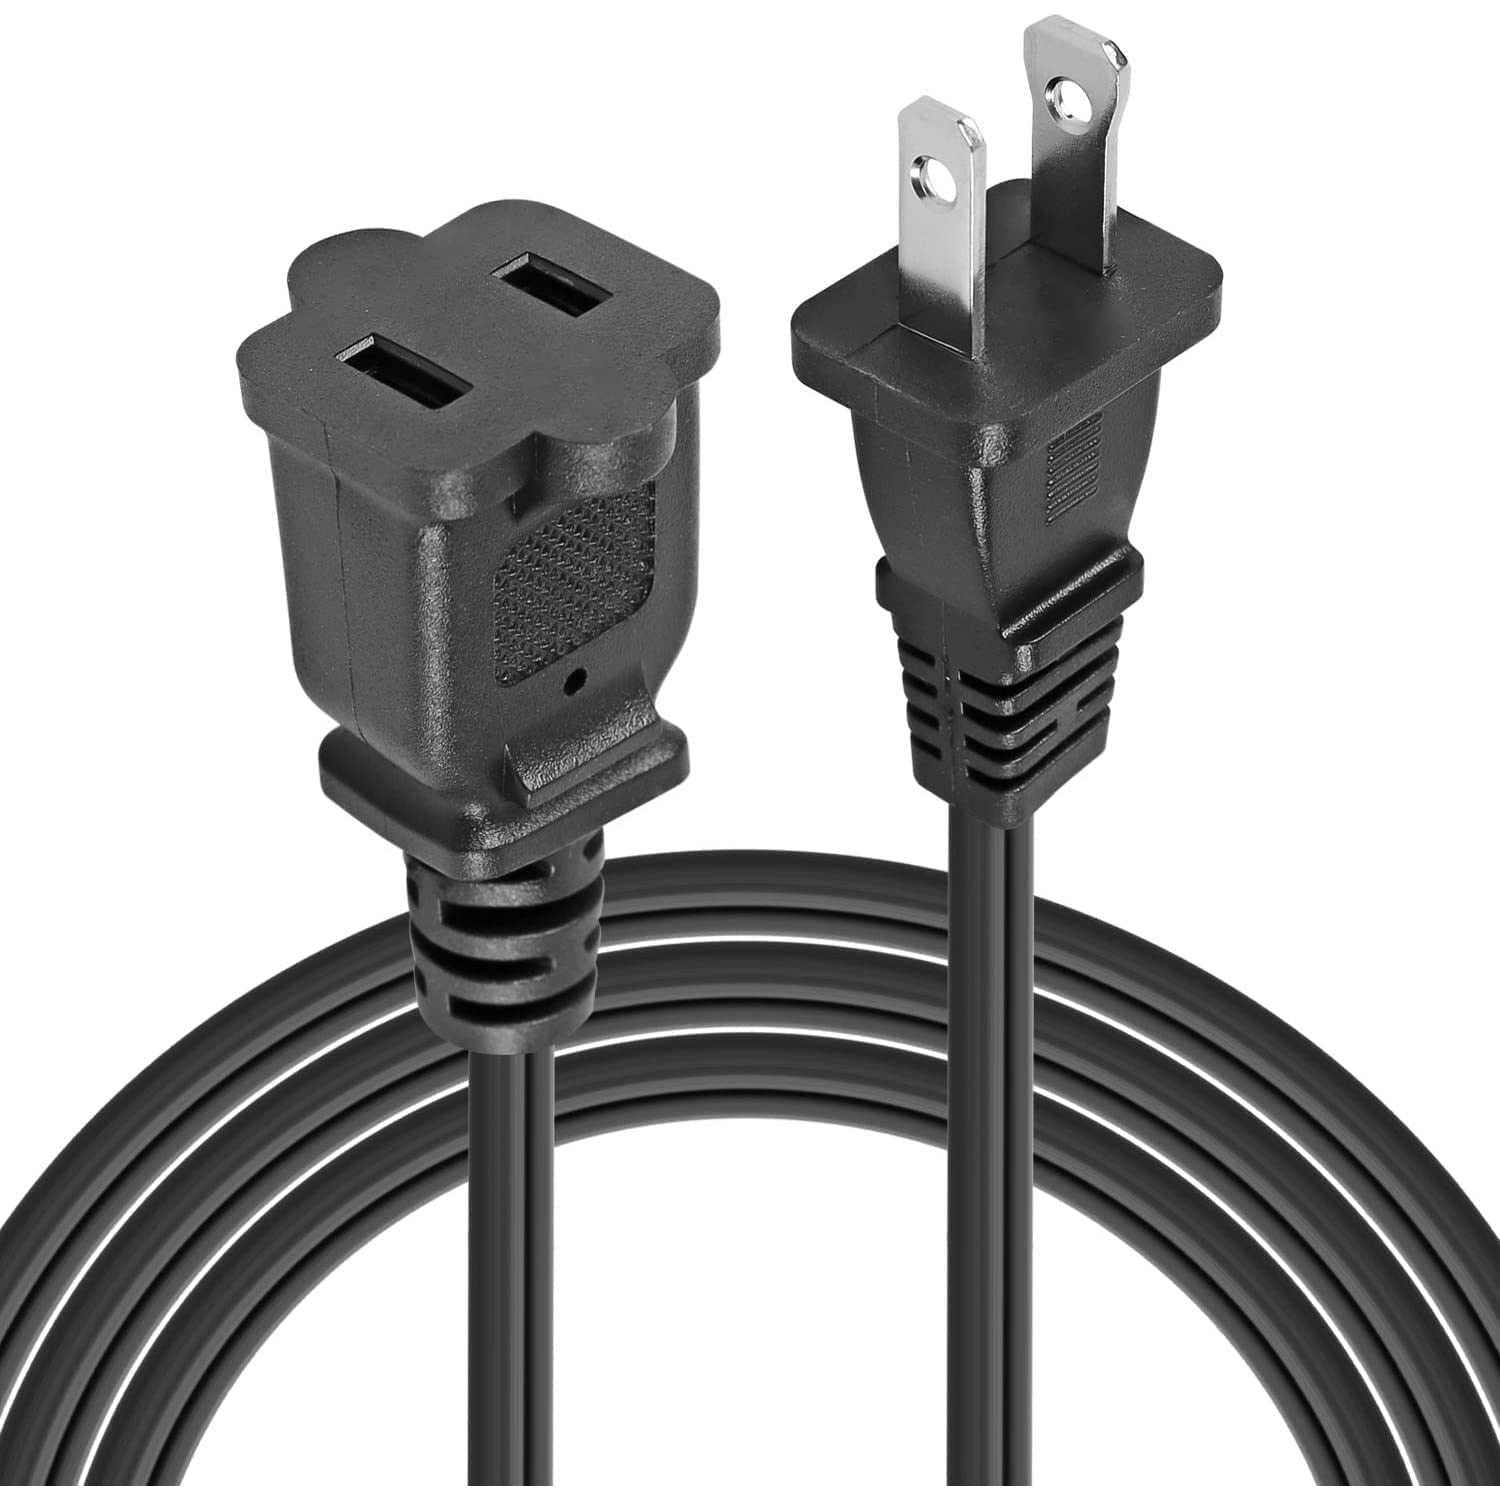 2-Prong Male-Female Extension Power Cord Cable; Outlet Extension Cable Cord US AC 2-Prong Male-Female Power Cable 13A/125V; Black 5 Core EXC BLK 6FT Moorescarts